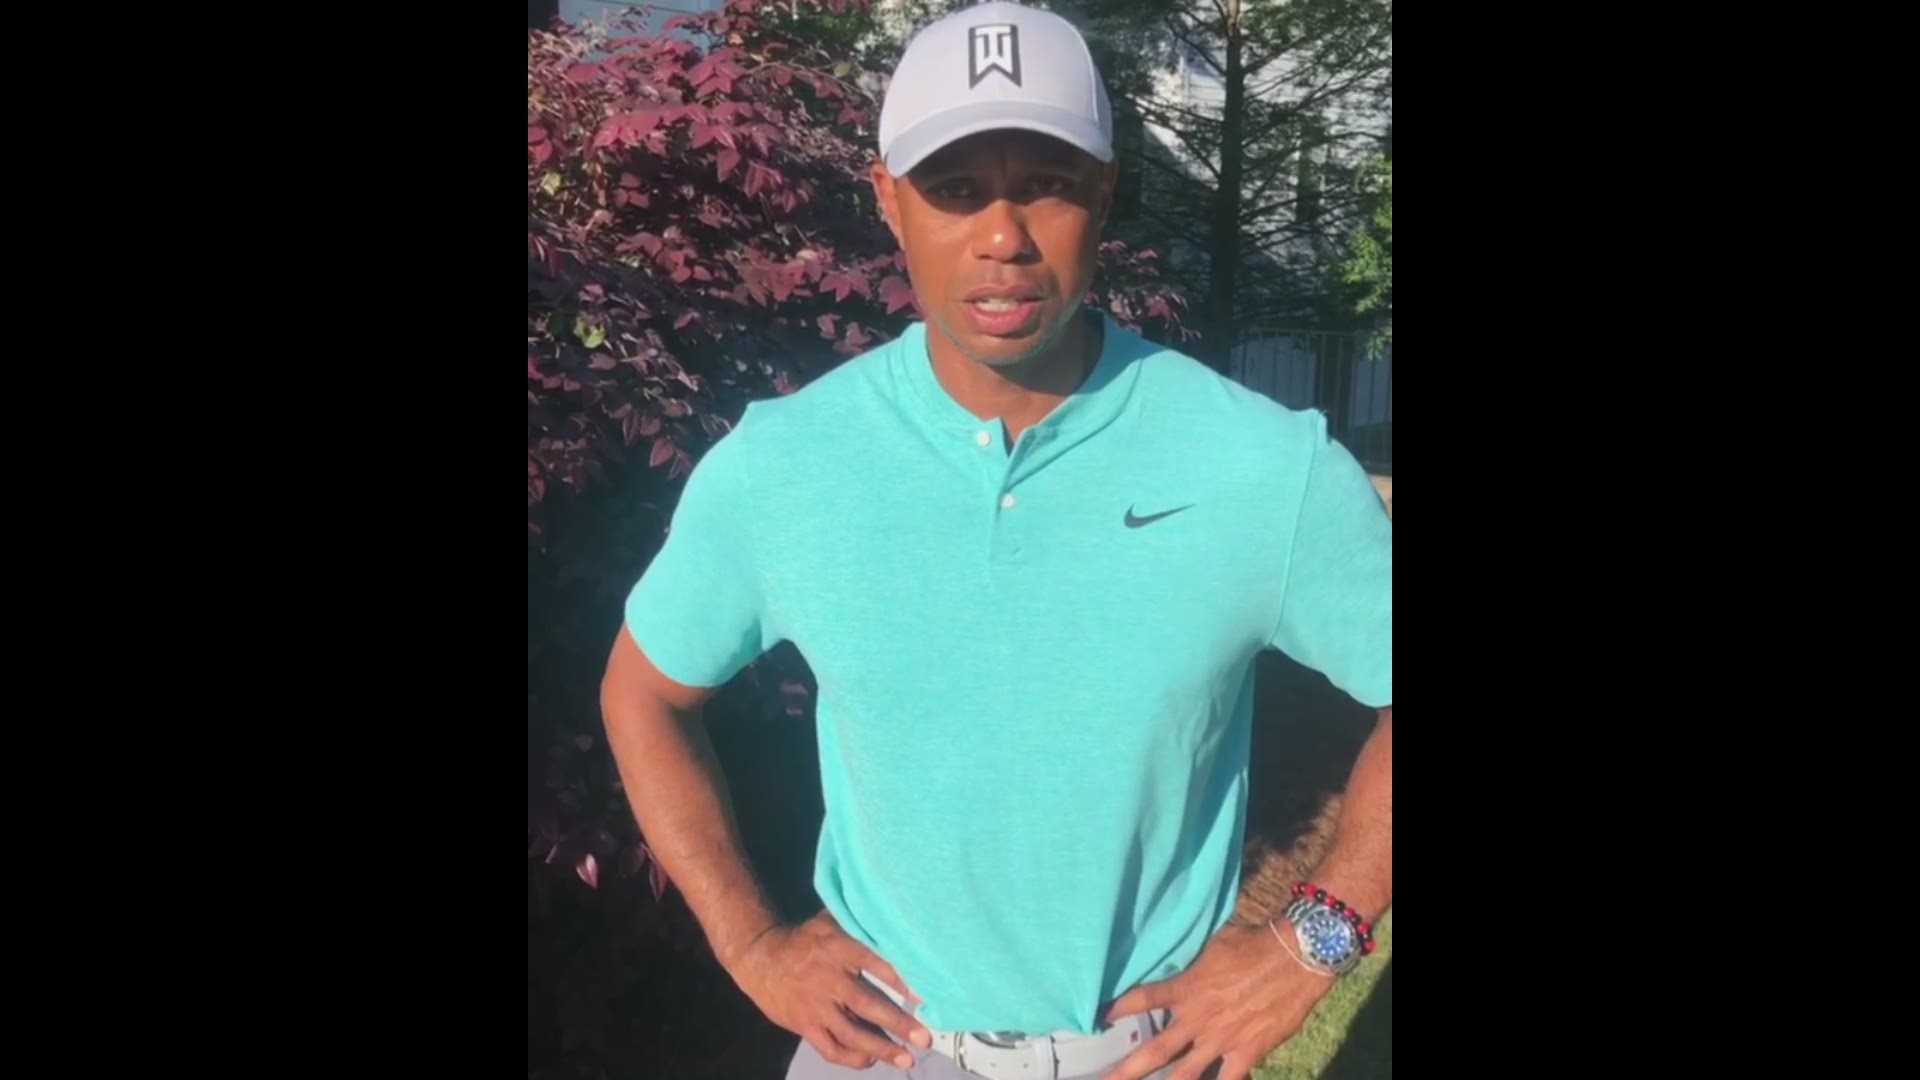 Tiger Woods surprises Charlotte man with Stage 4 Colon Cancer